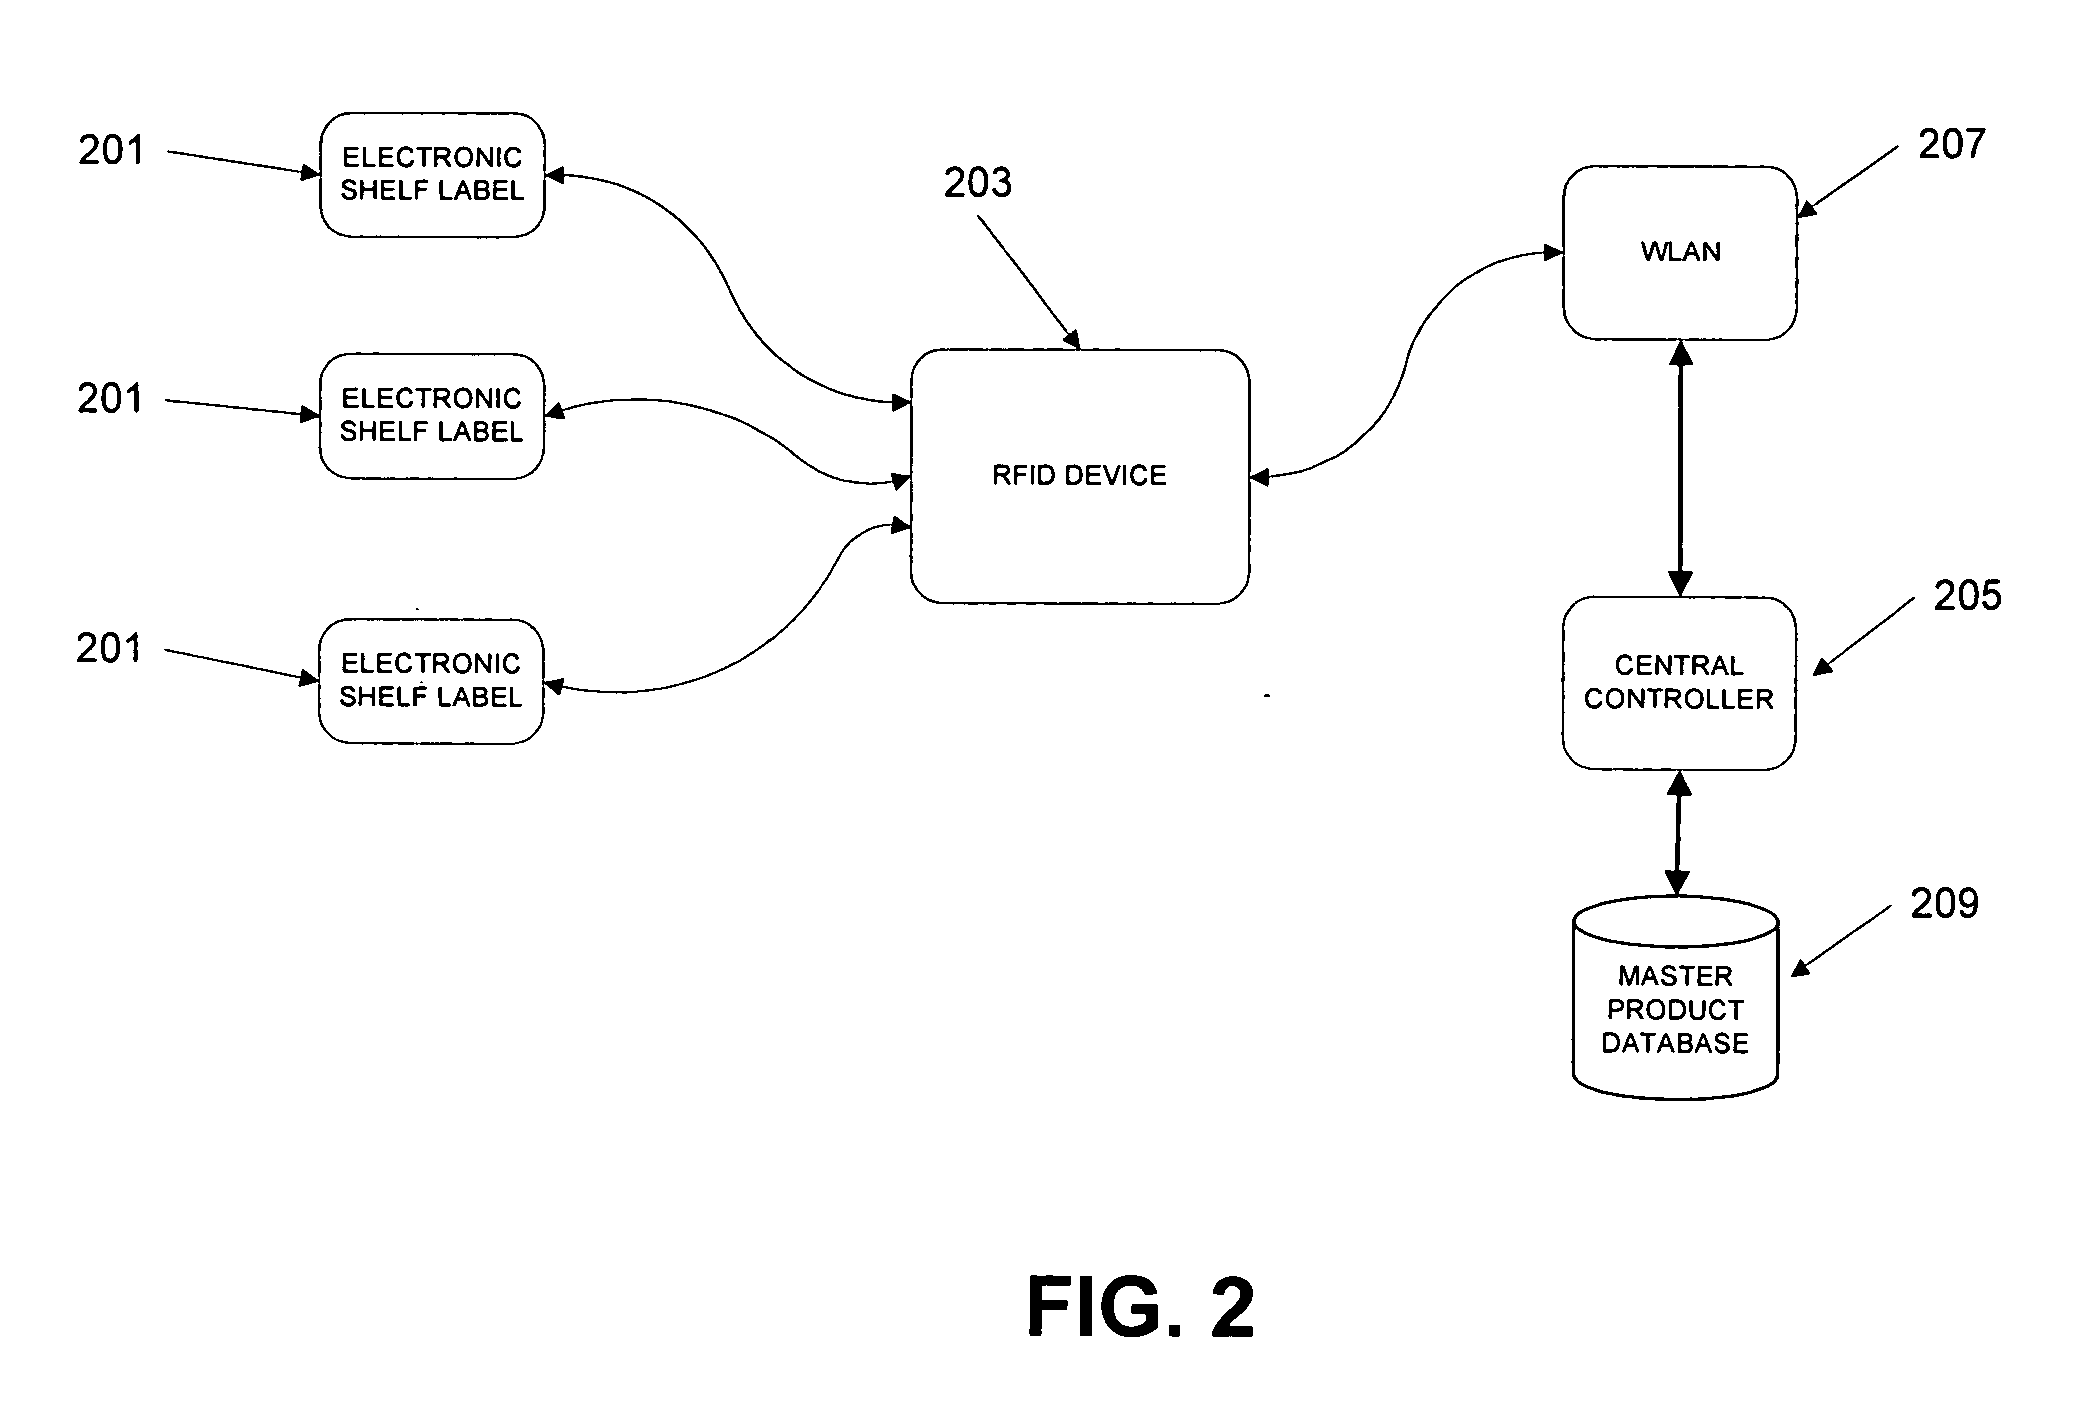 System and method for interrogating and updating electronic shelf labels